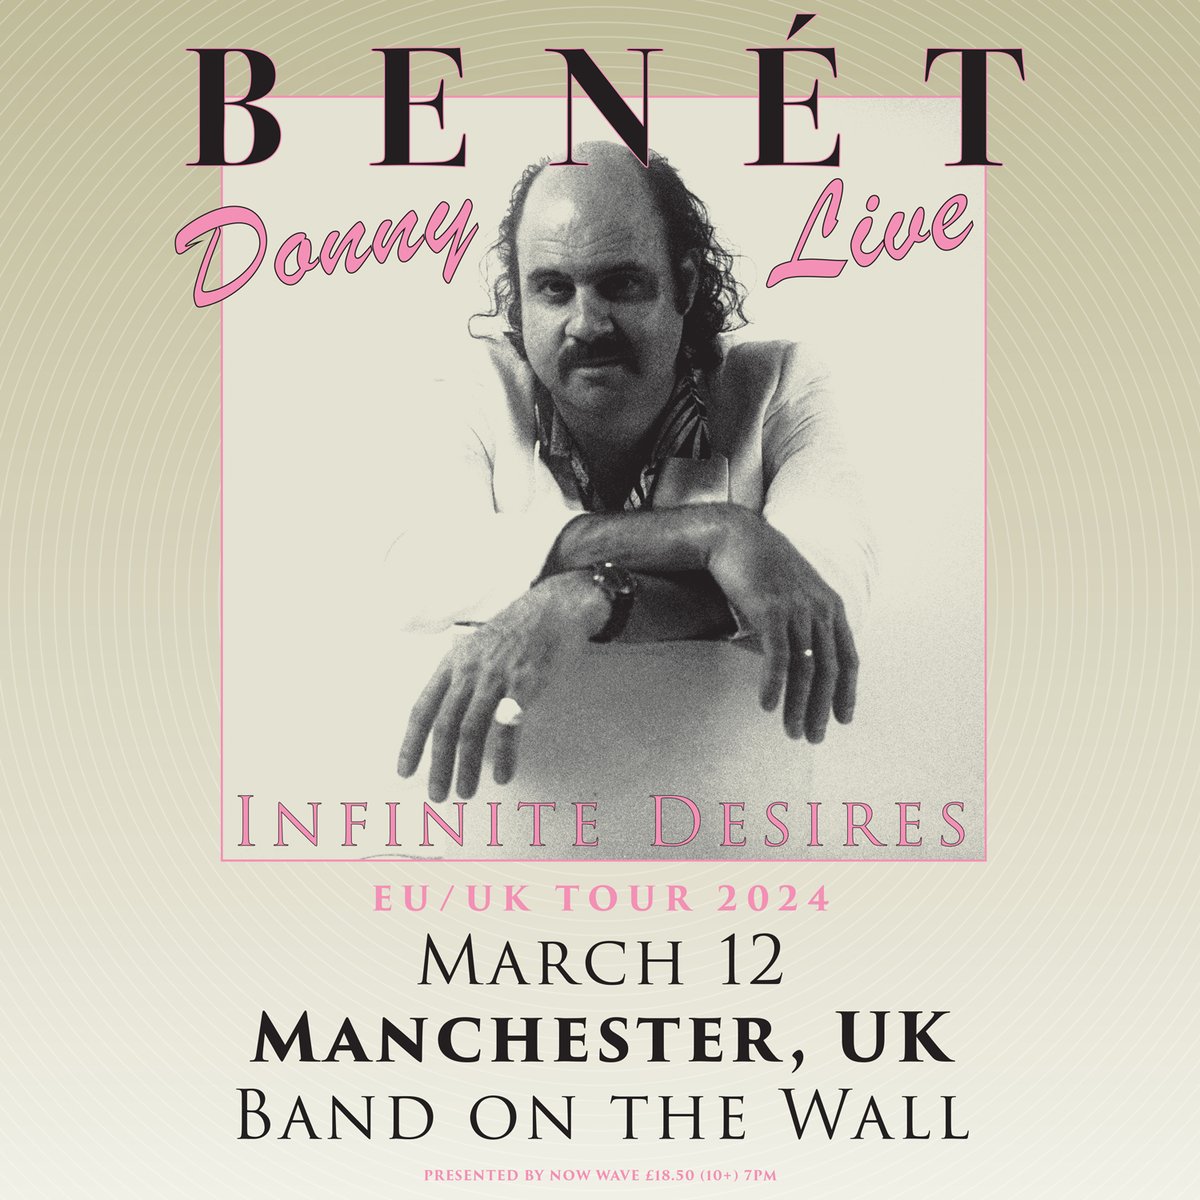 ON SALE NOW... The Don @DonnyBenet returns to Manchester on March 12th 2024 Tickets available here -> seetickets.com/event/donny-be…